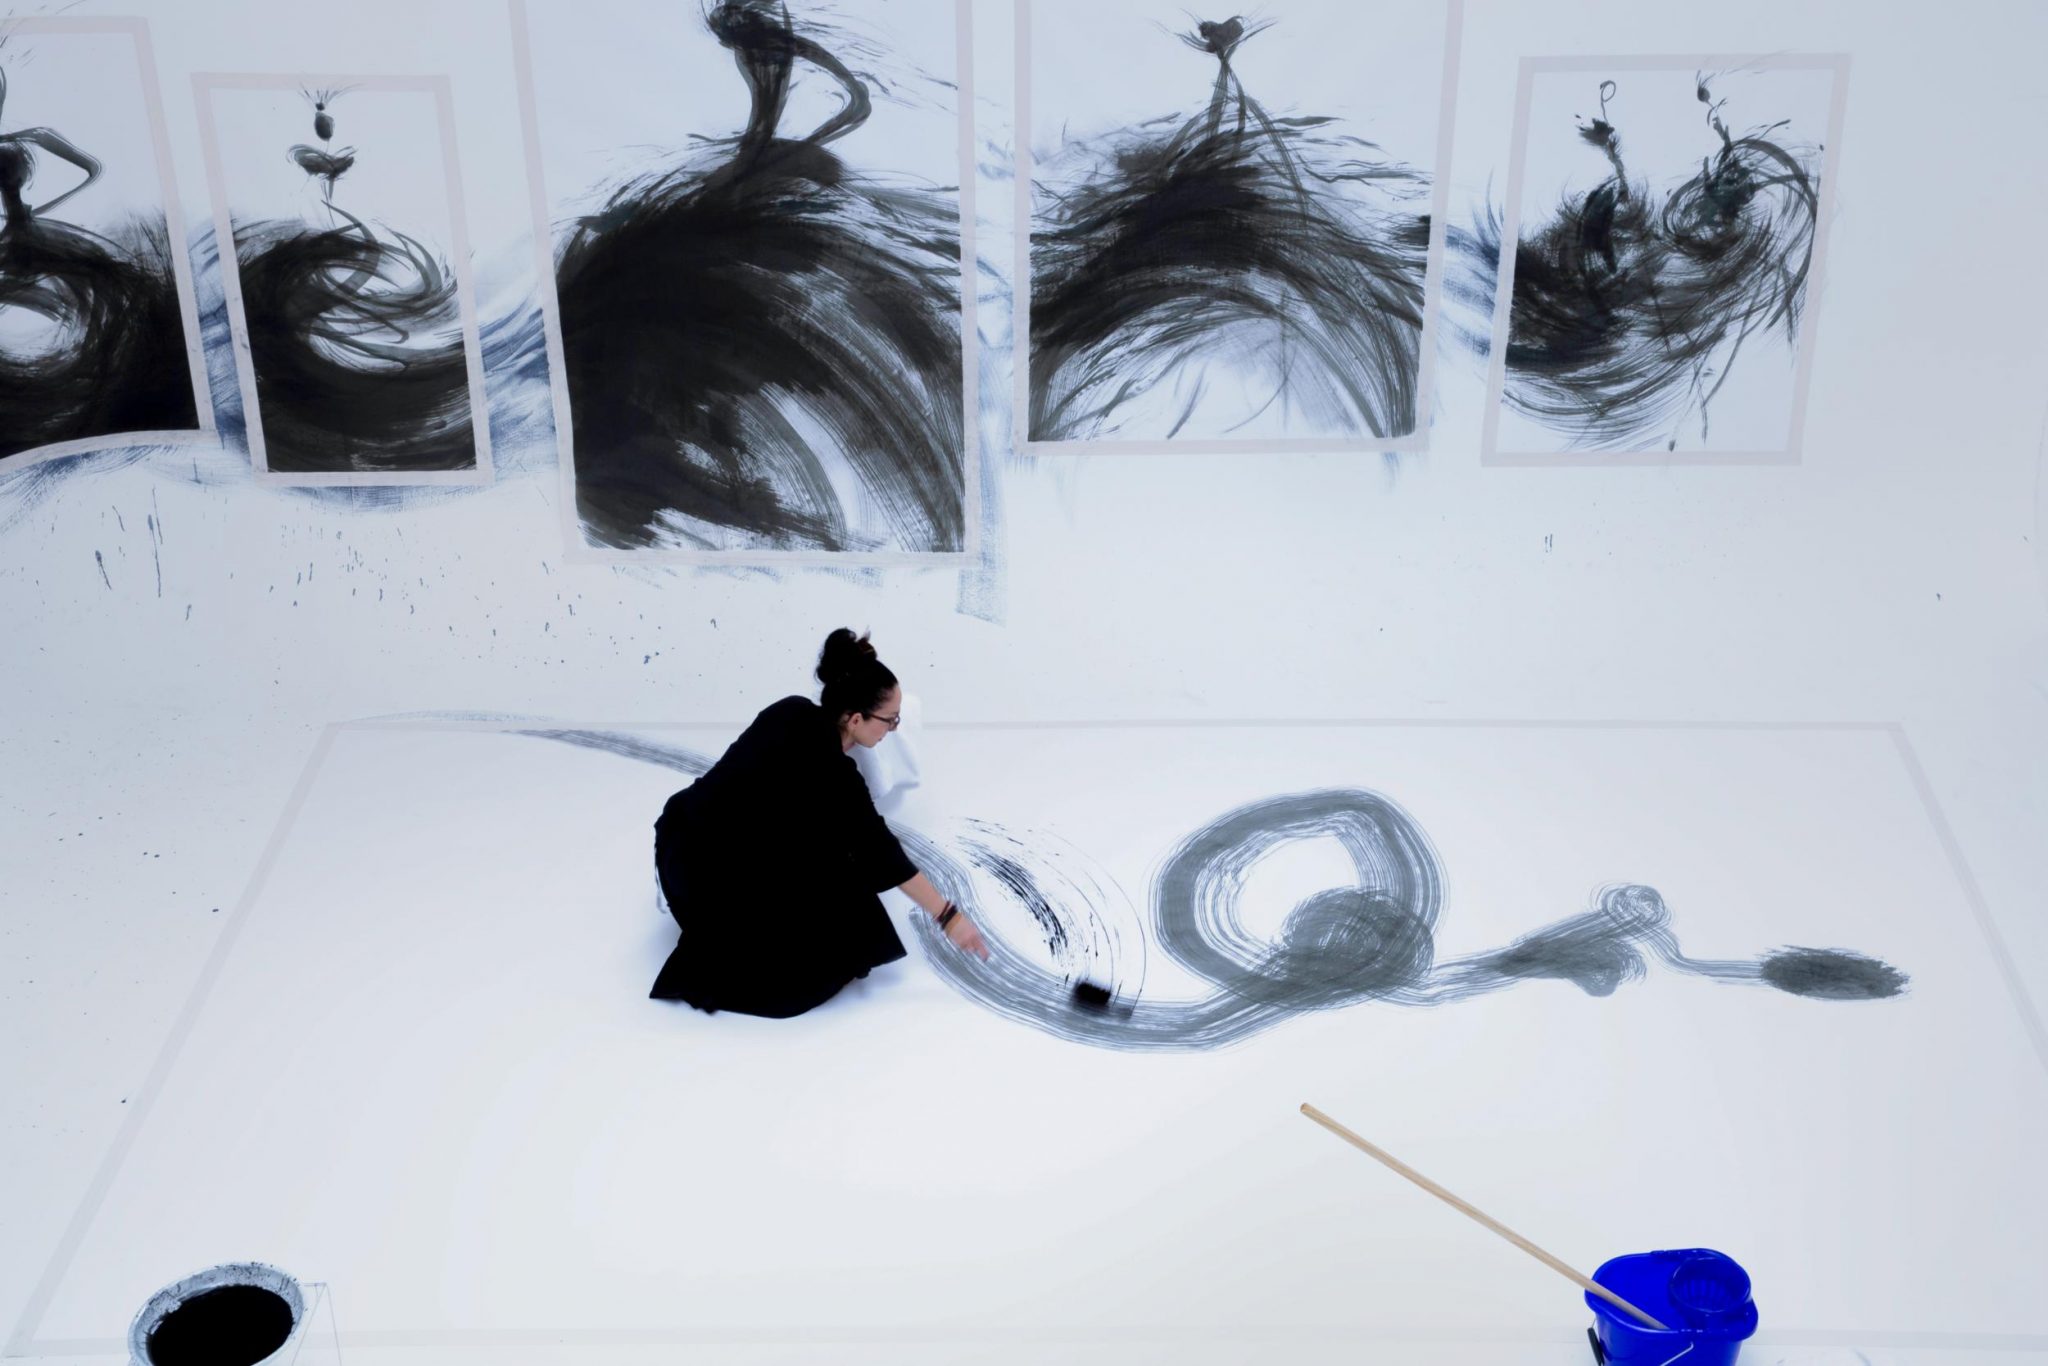  | SHOWStudio | Nightlight Series: On 26 April 2019, artist Tobie Giddio took up residency in the SHOWstudio space to create a large-scale fashion illustration live. The broadcast showcases Giddio’s creative process from start to finish, documenting her as she paints the walls and floor of the studio cove with ink. For this work, Giddio utilises a unique set of tools, comprising large Japanese brushes, mops and feather dusters.  | 13